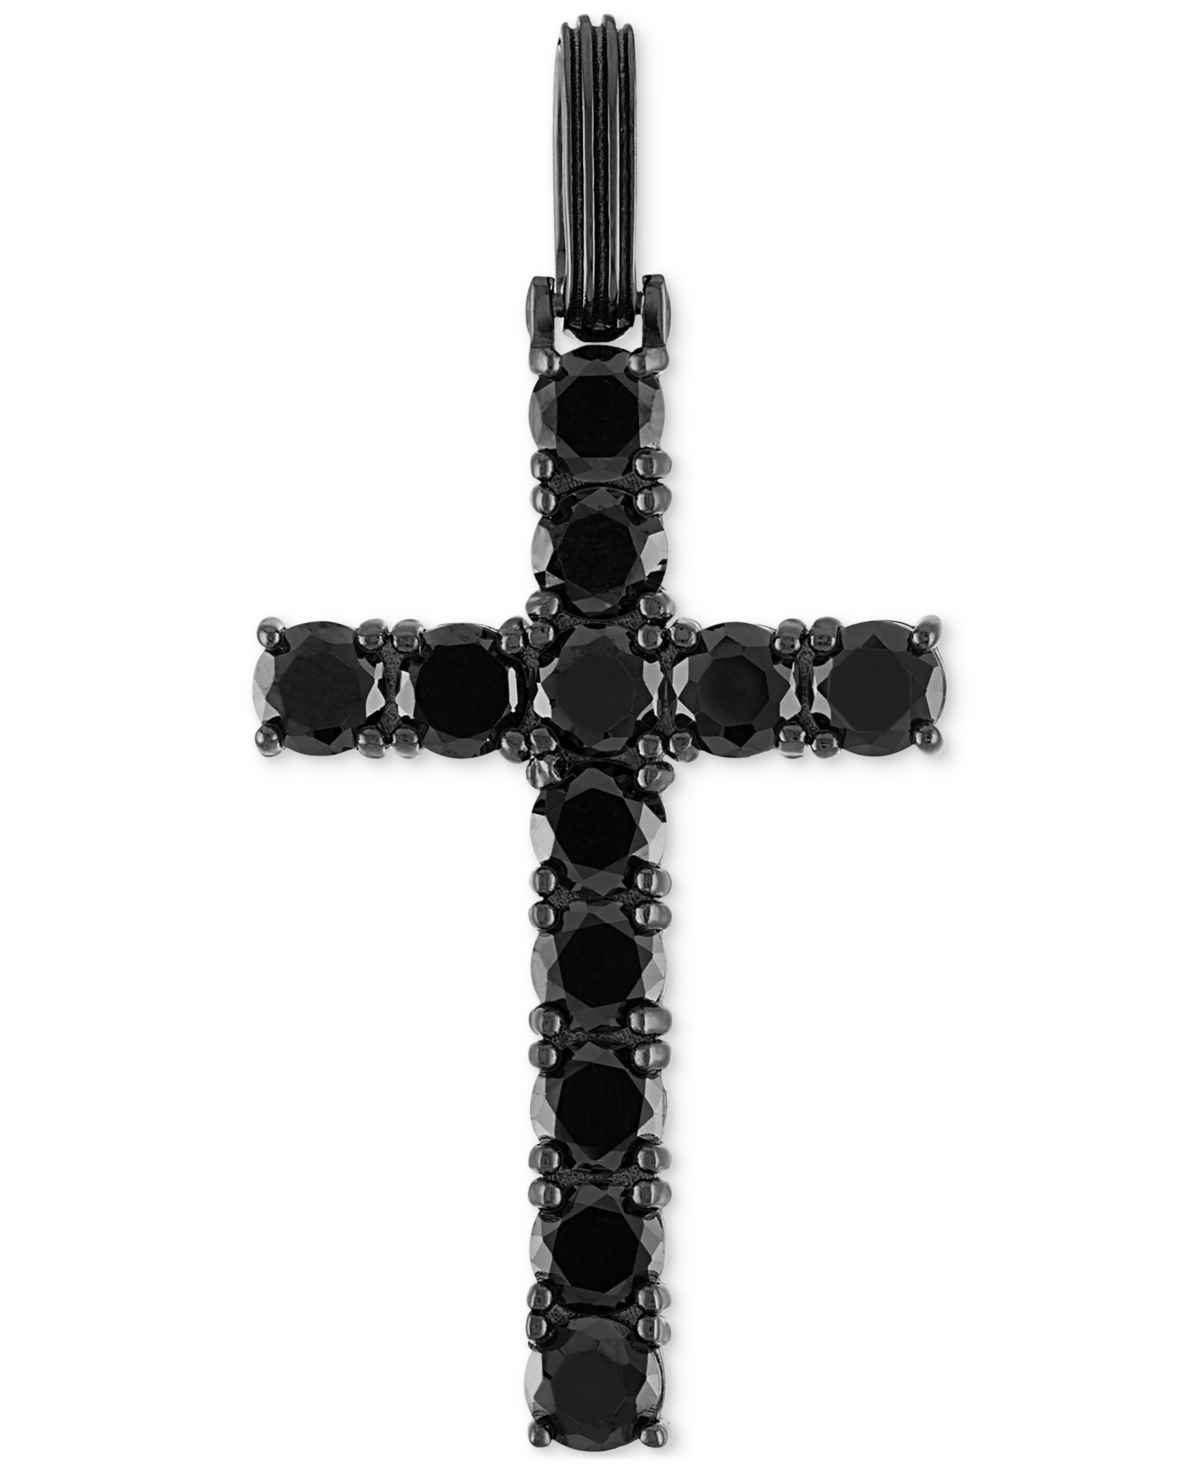 Black Cubic Zirconia Cross Pendant in Black Ruthenium-Plated Sterling Silver (Also in White Cubic Zirconia), Created for Macy's